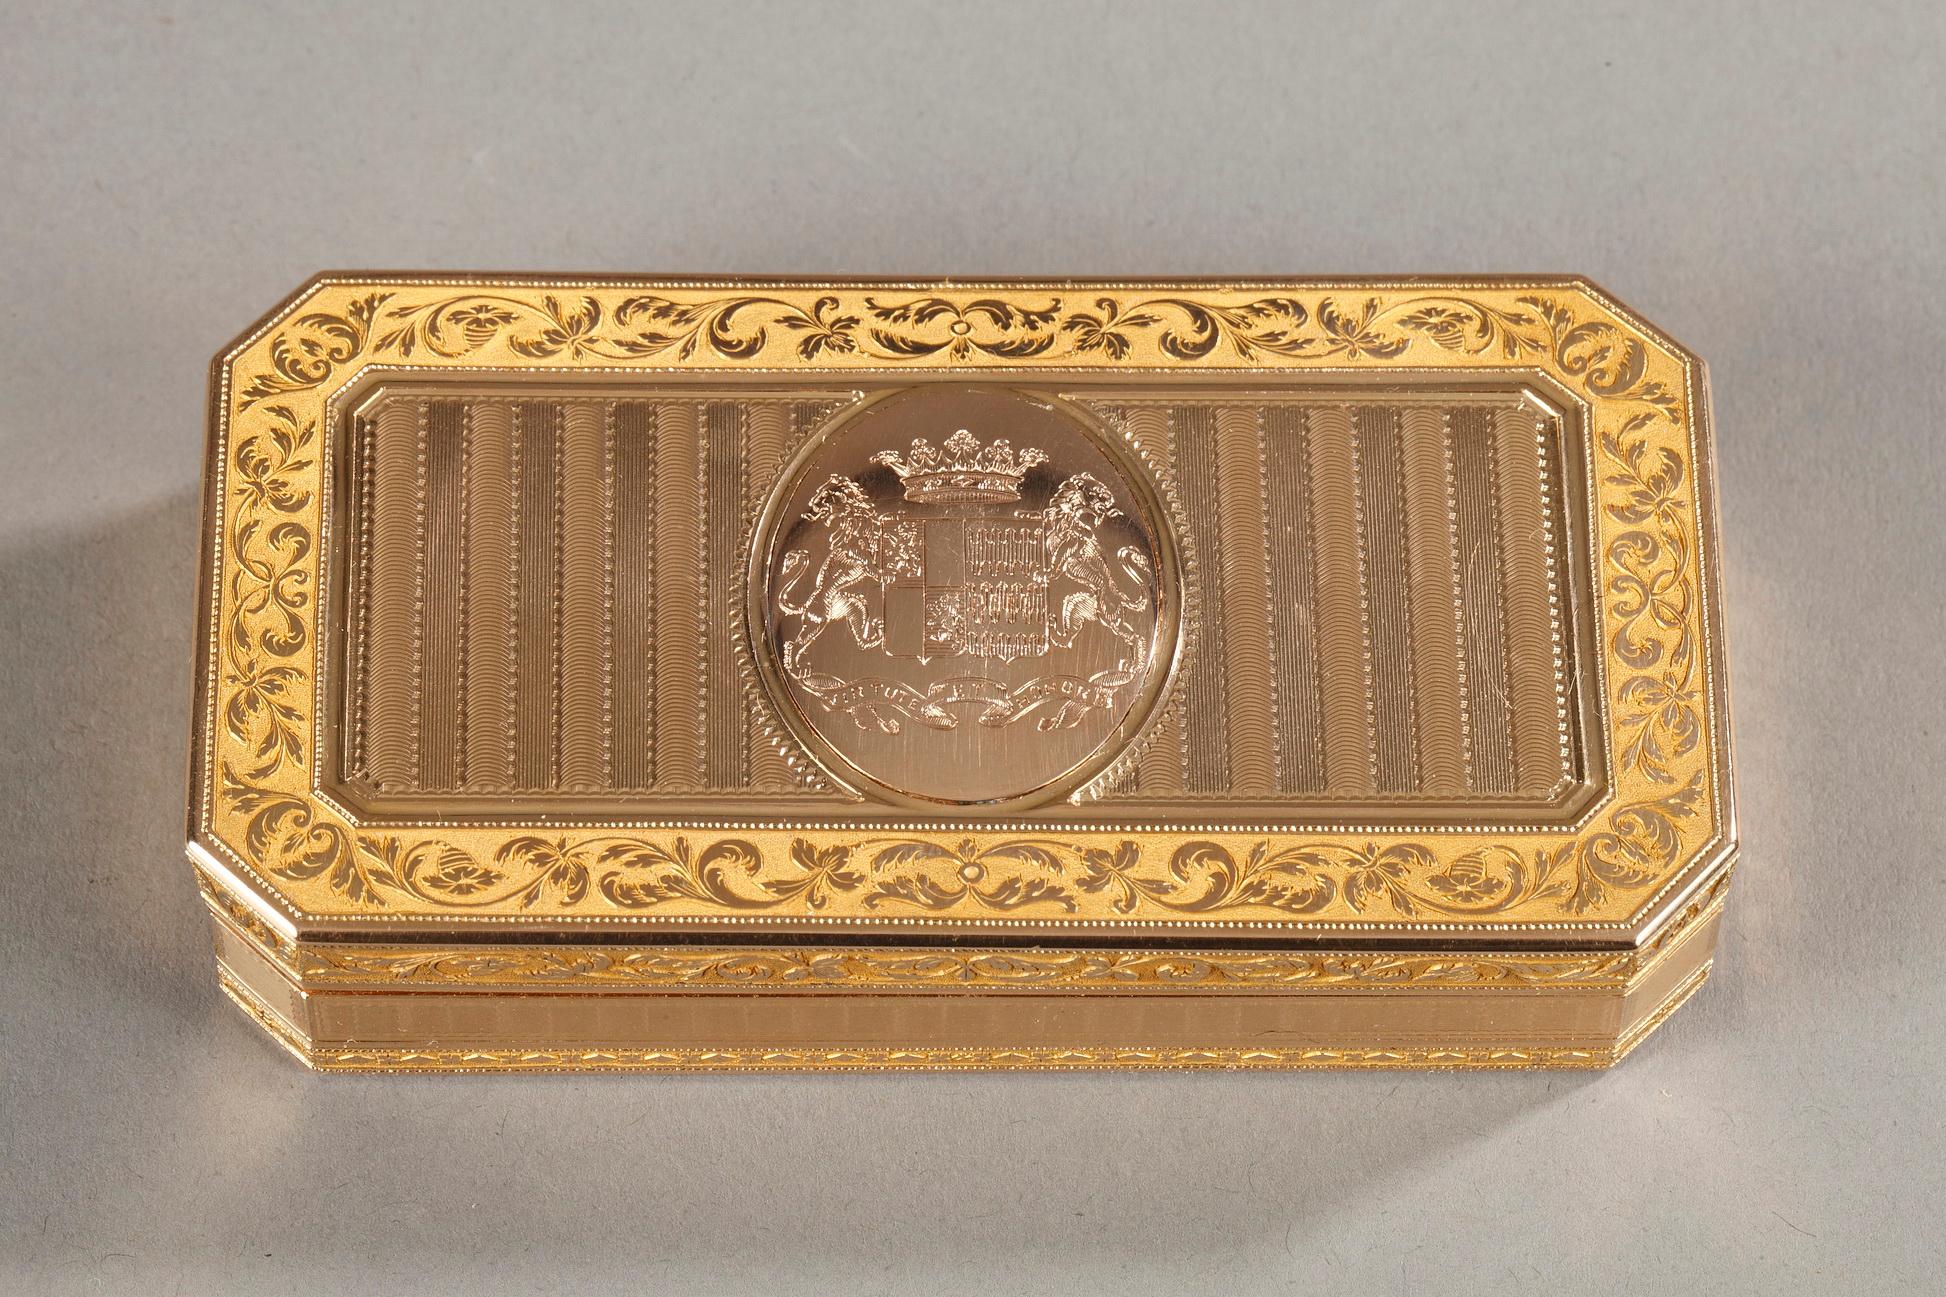 Large rectangular snuffbox with angled corners sides. The hinged lid is embellished with a guilloche pattern with alternating parallel and horizontal strips of matt and shiny gold. In the center of the lid a medallion presents the coat of arms of an